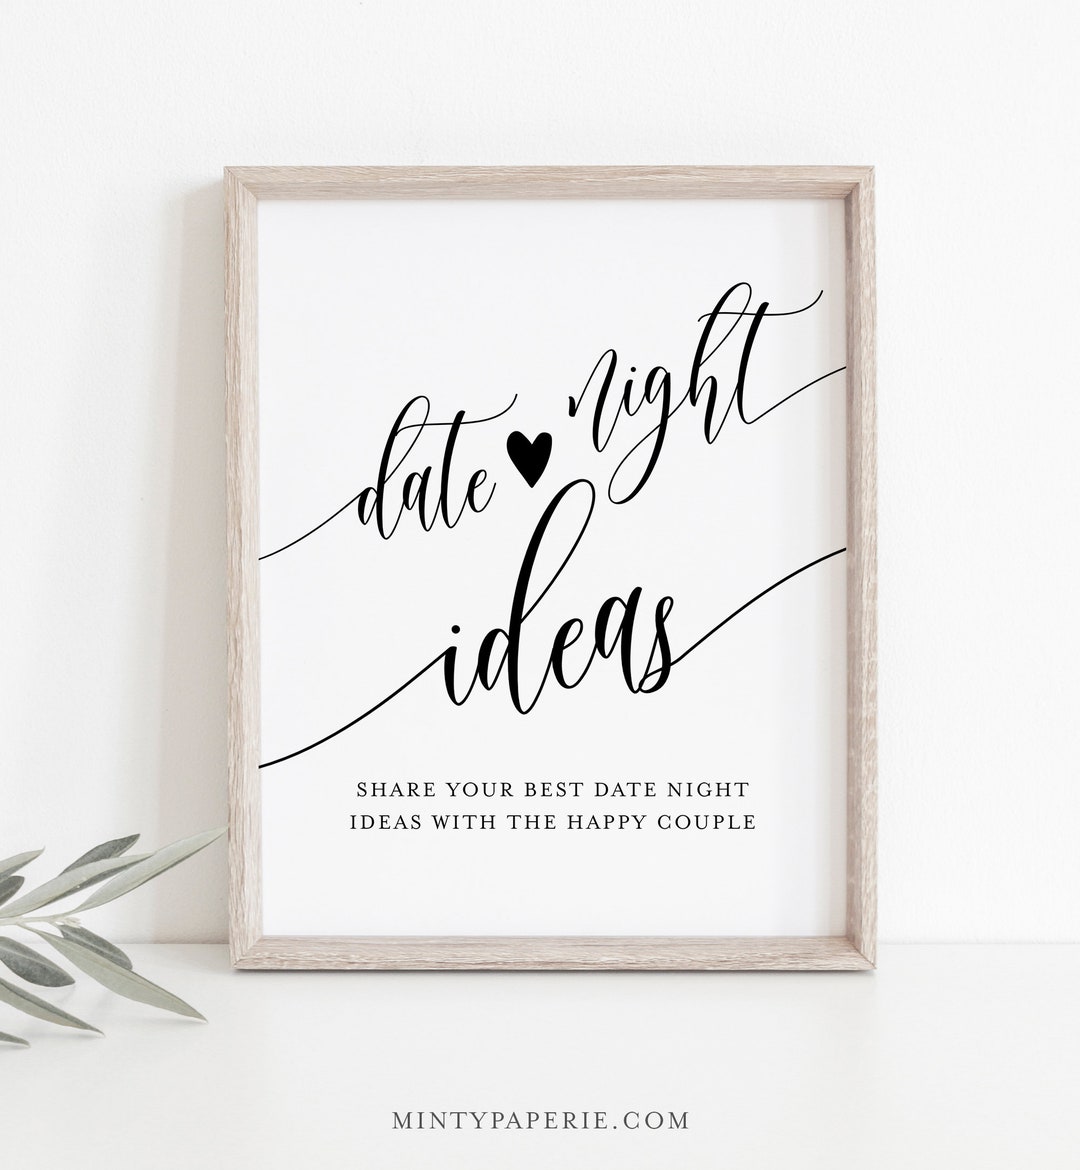 Date Night Ideas for the Happy Couple - Idea Jar Card - Wedding Advice  Cards - Gold Heart - 4x4 Square - Pack of 40